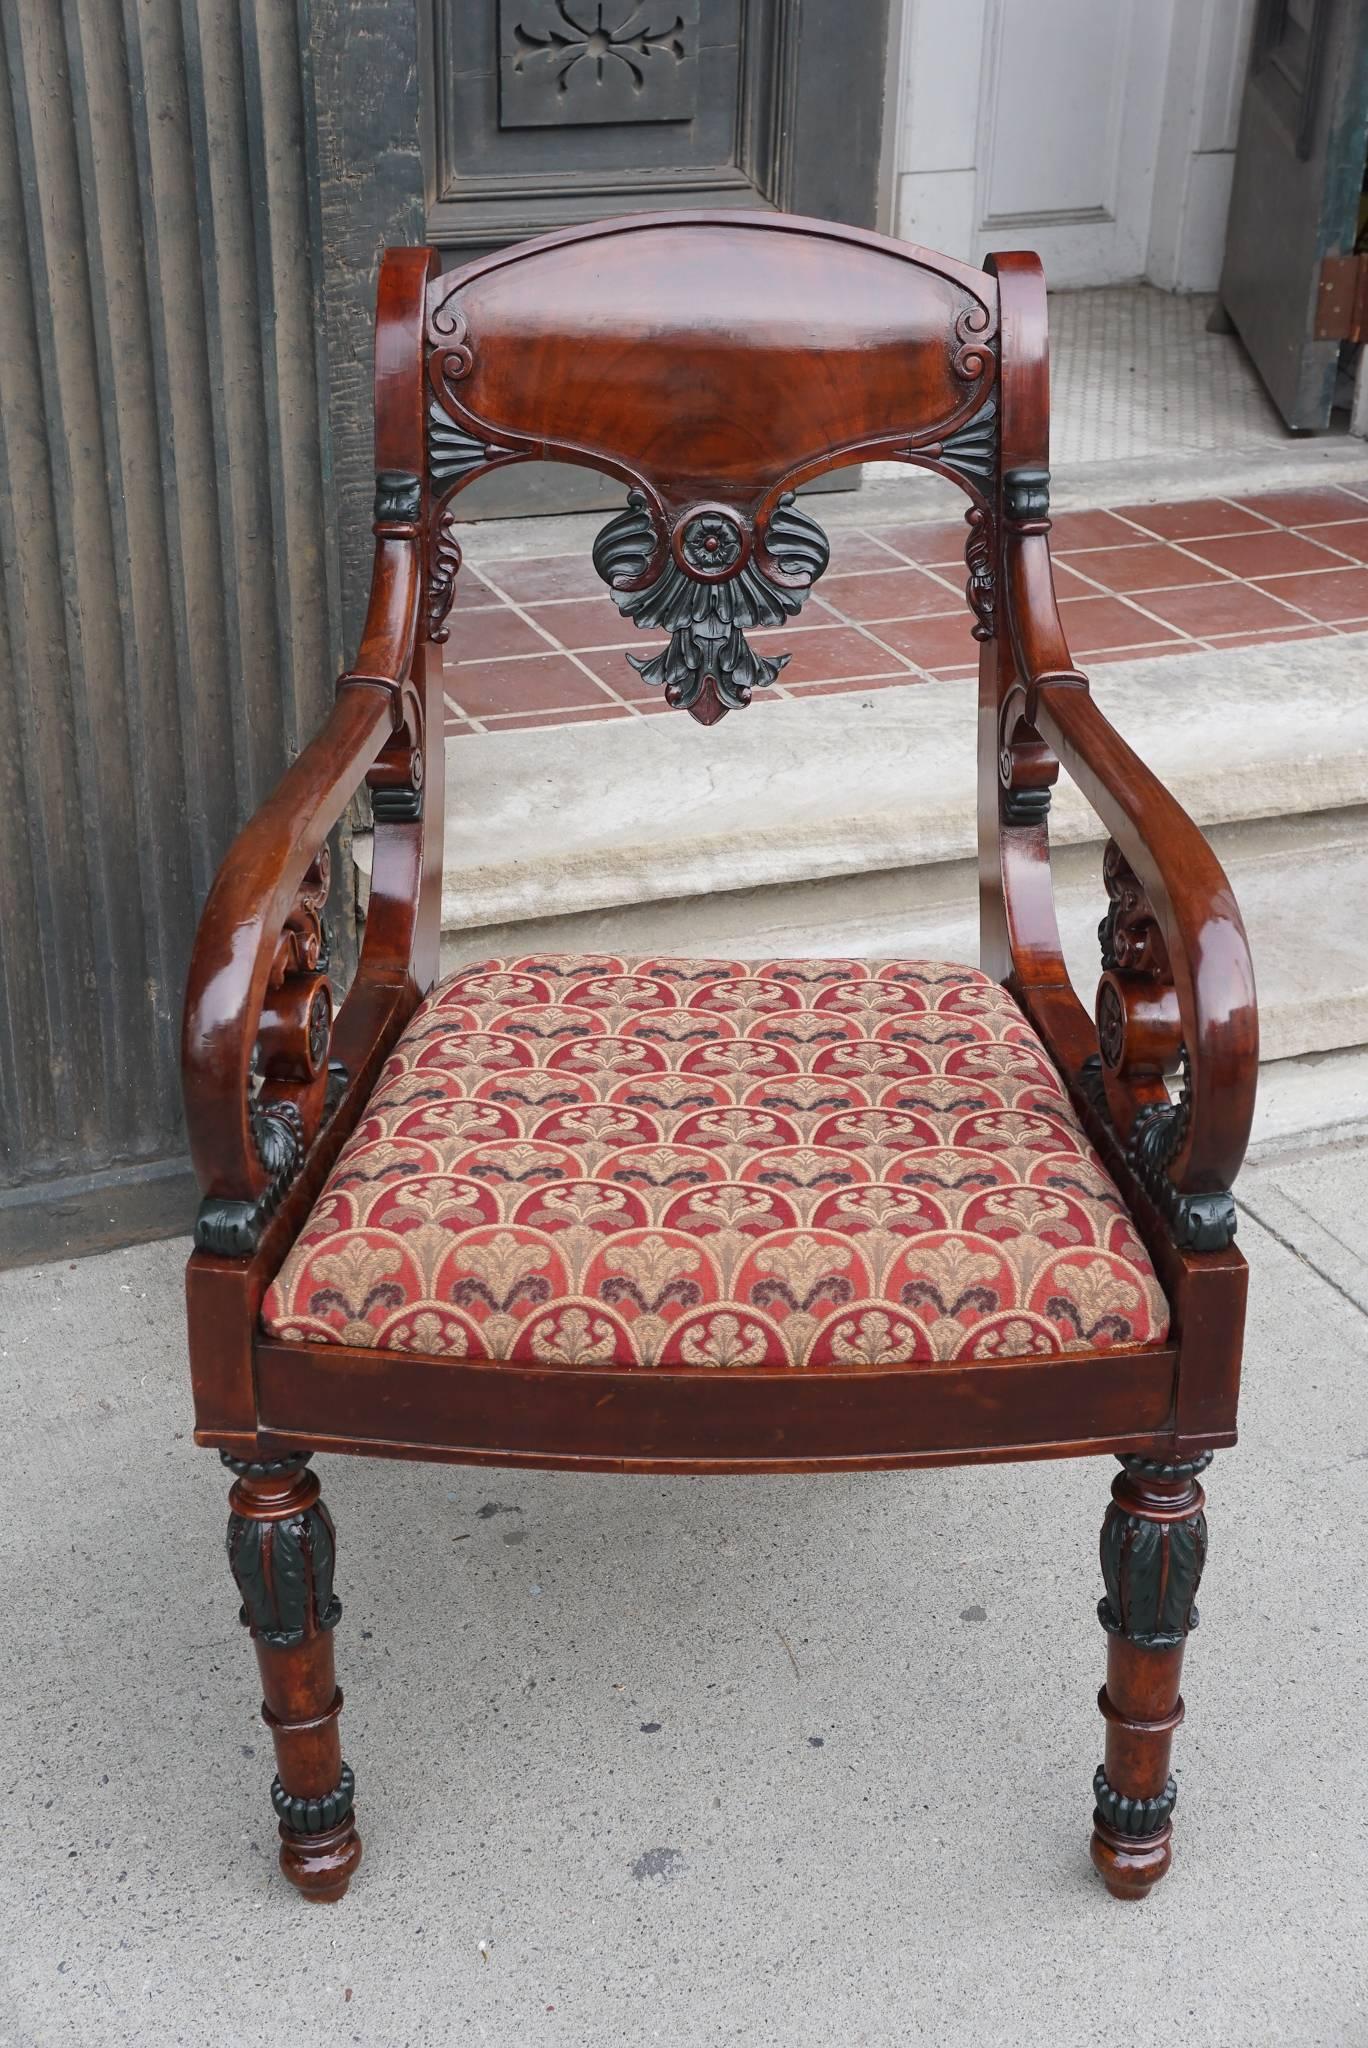 This finely carved mahogany armchair is from the 19th century. Made in Russia around 1870 the chair is further enhanced with a verde antique paint work resembling ancient bronze on the carved elements. This makes the chair very masculine and formal.